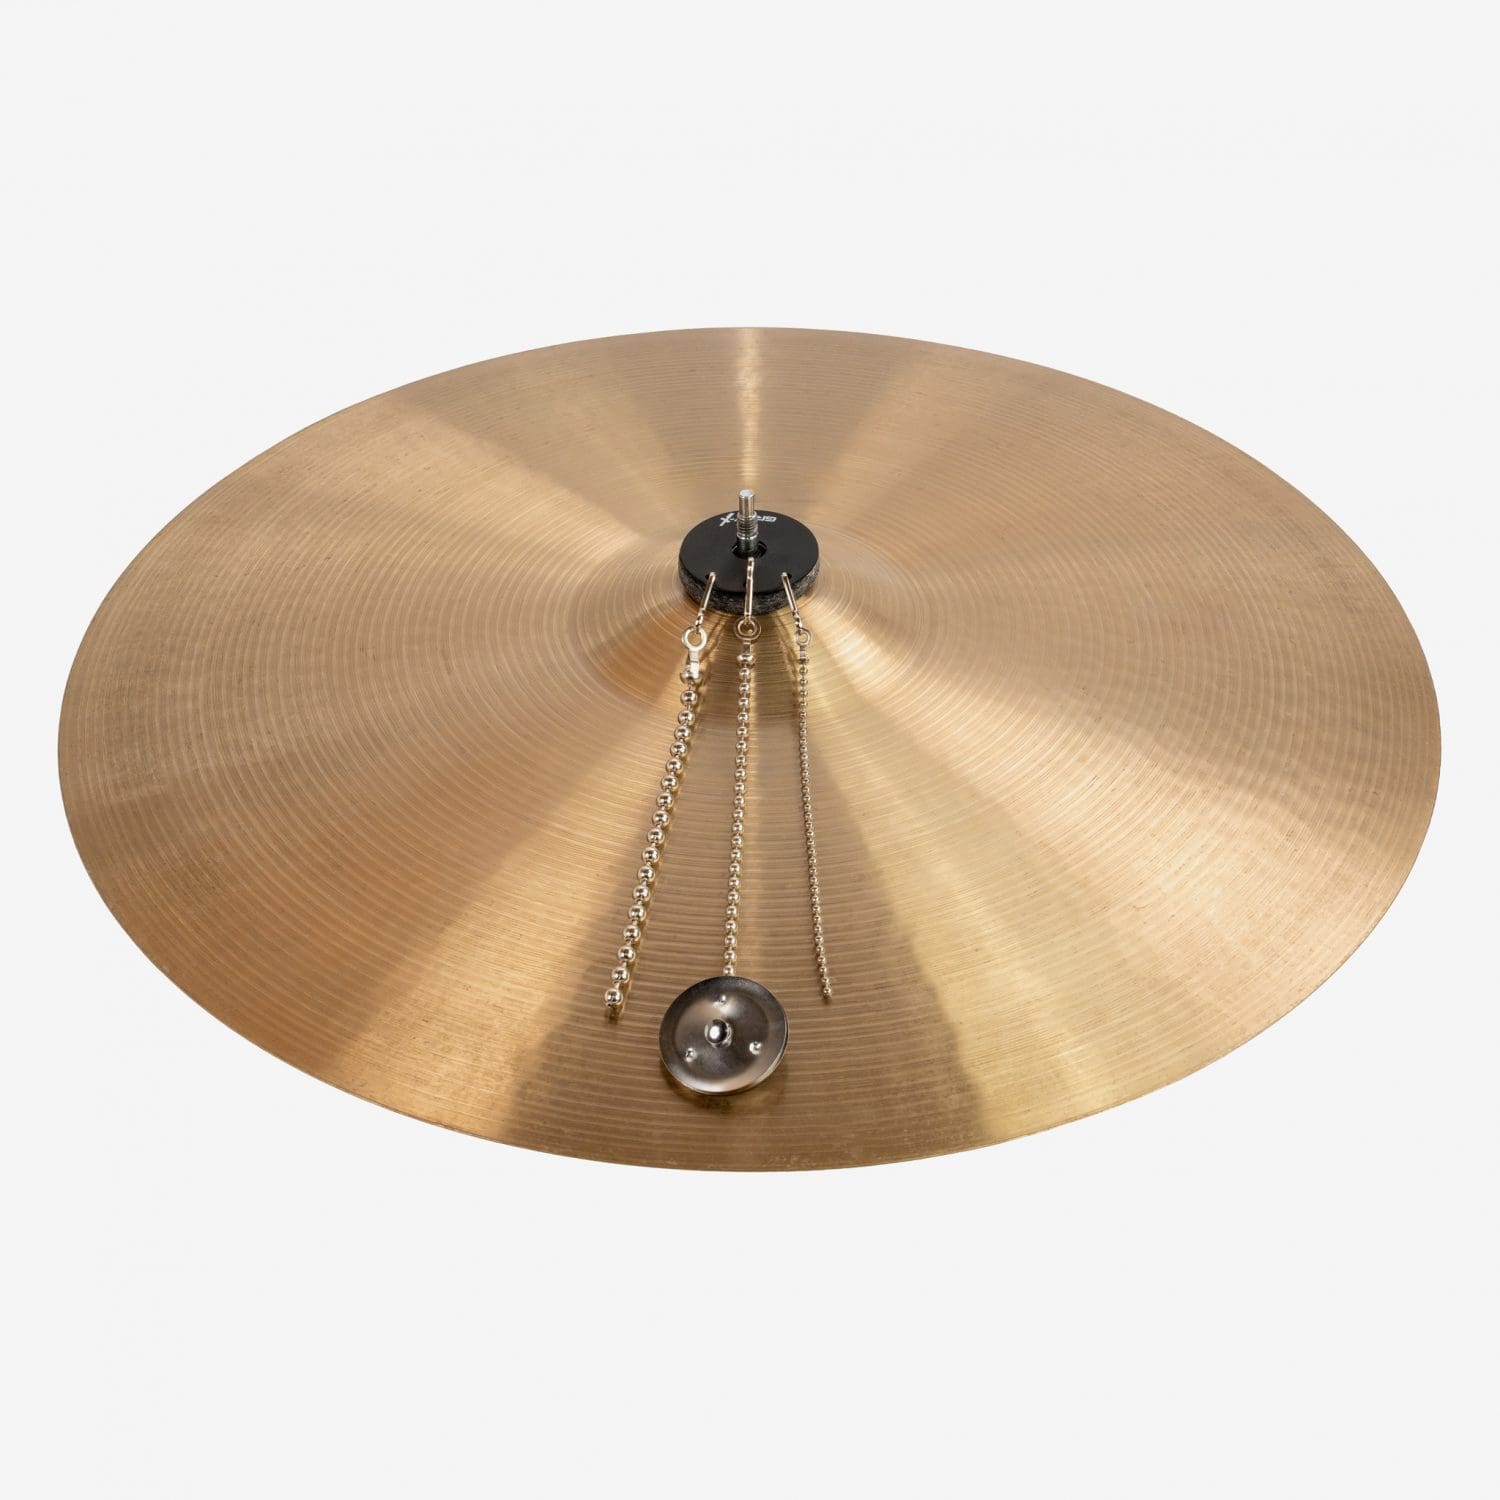 X-MAG Cymbal Sizzle